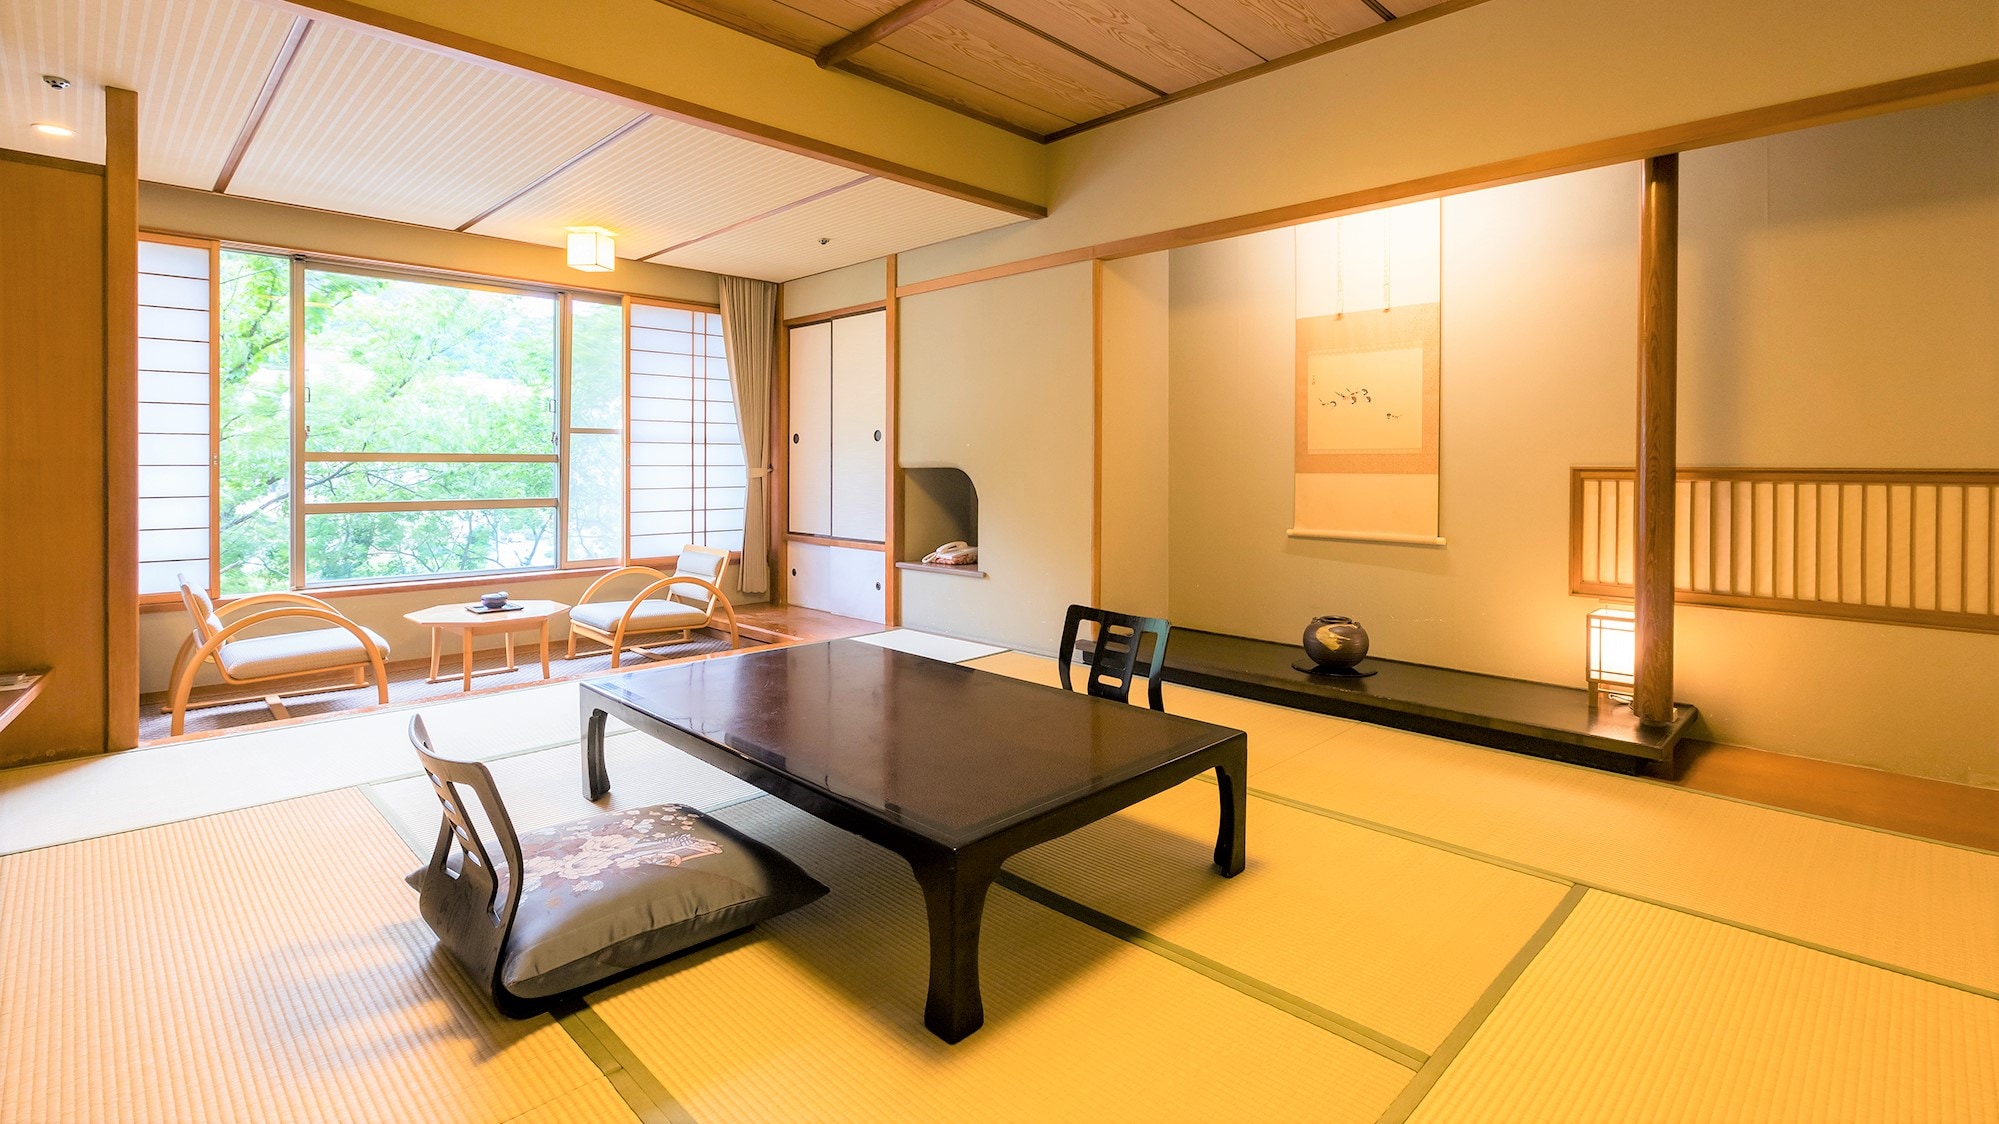 [River side] 10 tatami mats, an example of a Japanese-style room